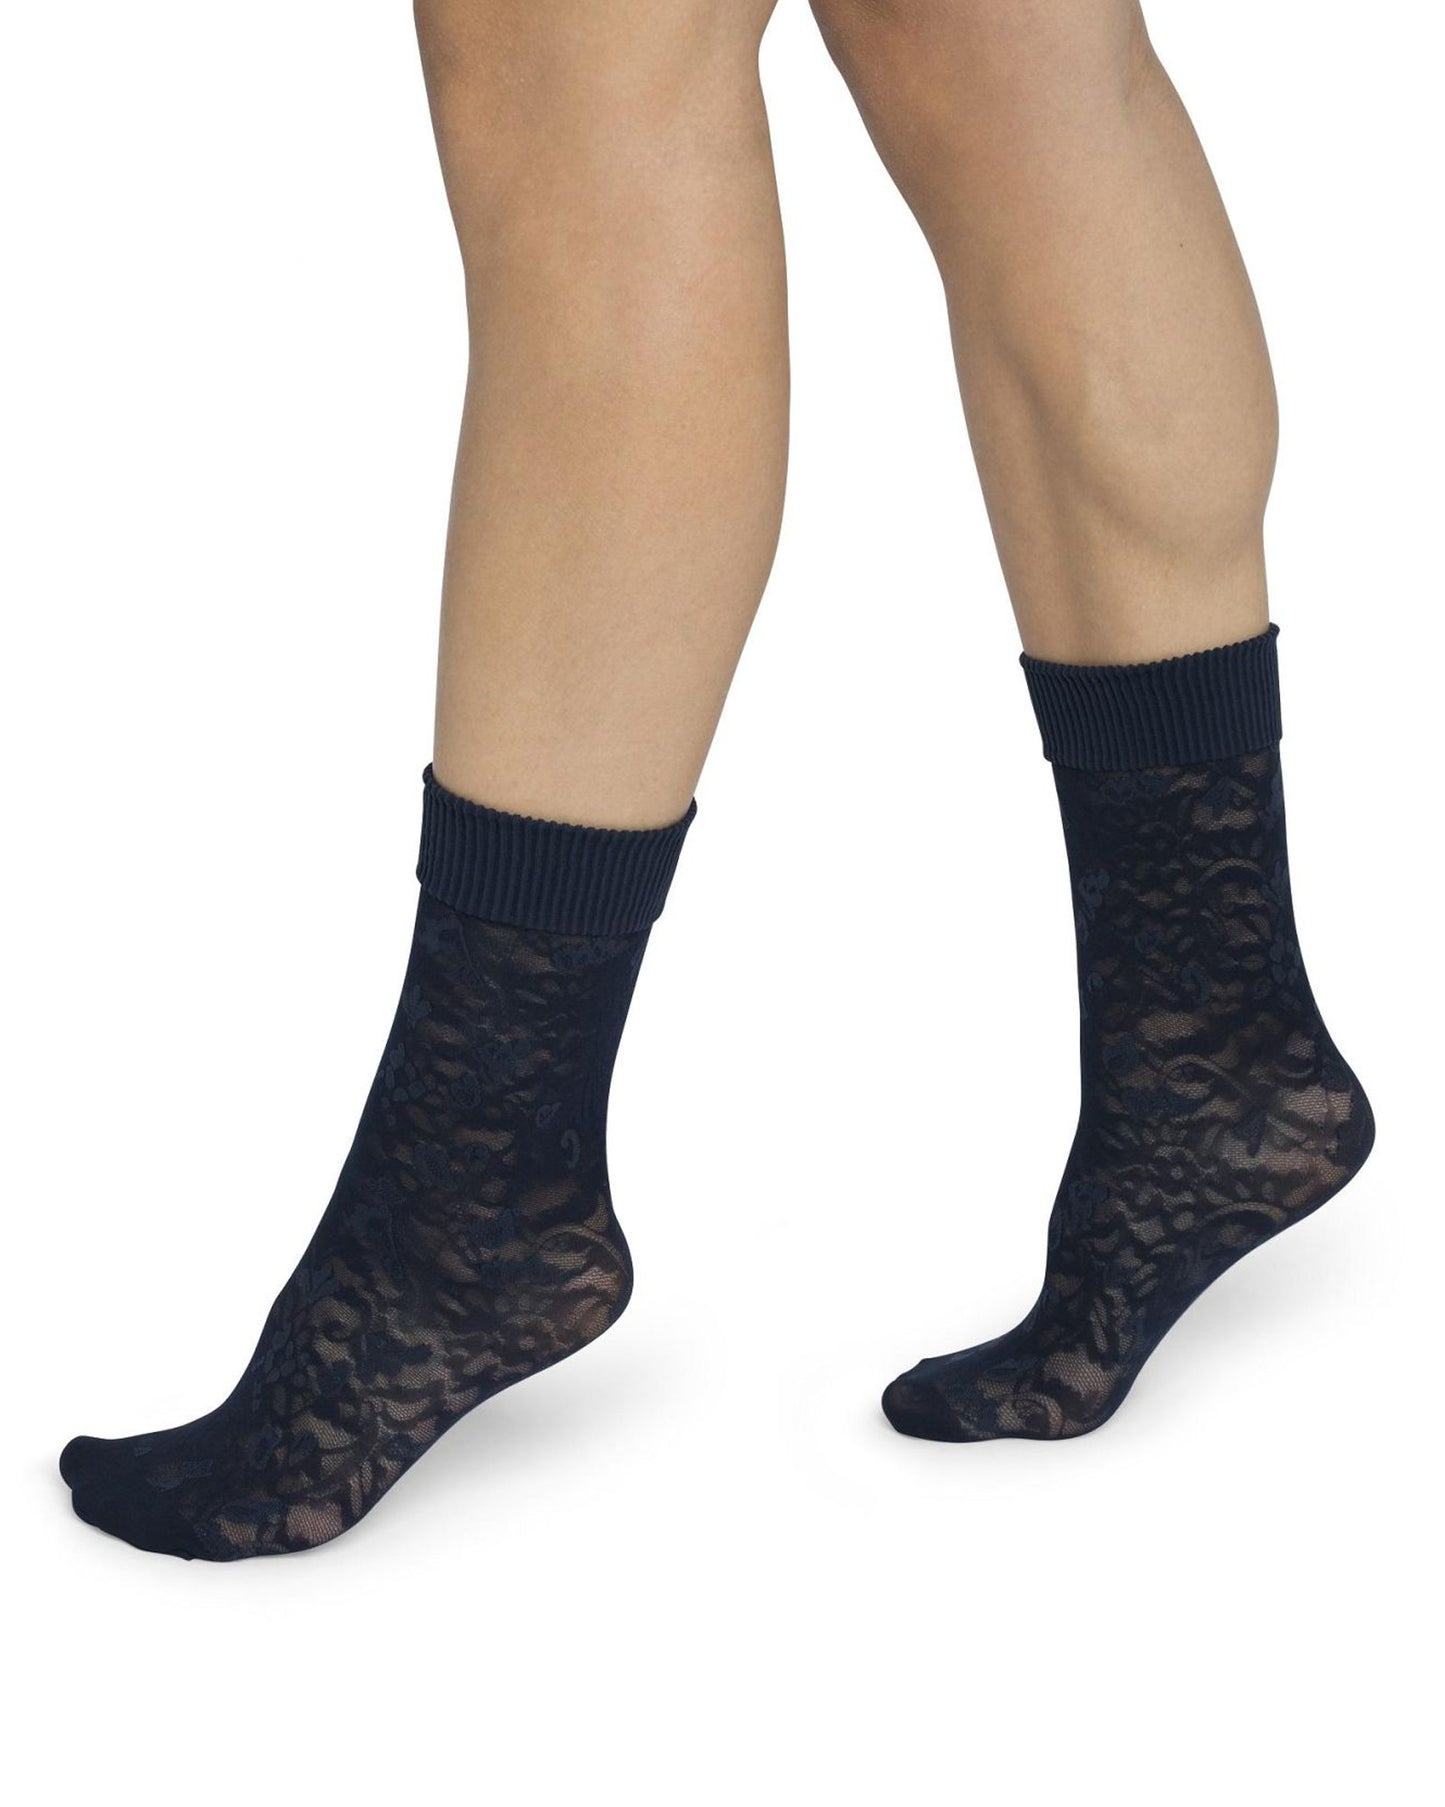 Bonnie Doon Floral Lace Socks - Black semi-opaque floral lace style pattern fashion ankle socks with a soft ribbed deep elasticated comfort cuff and reinforced toe.